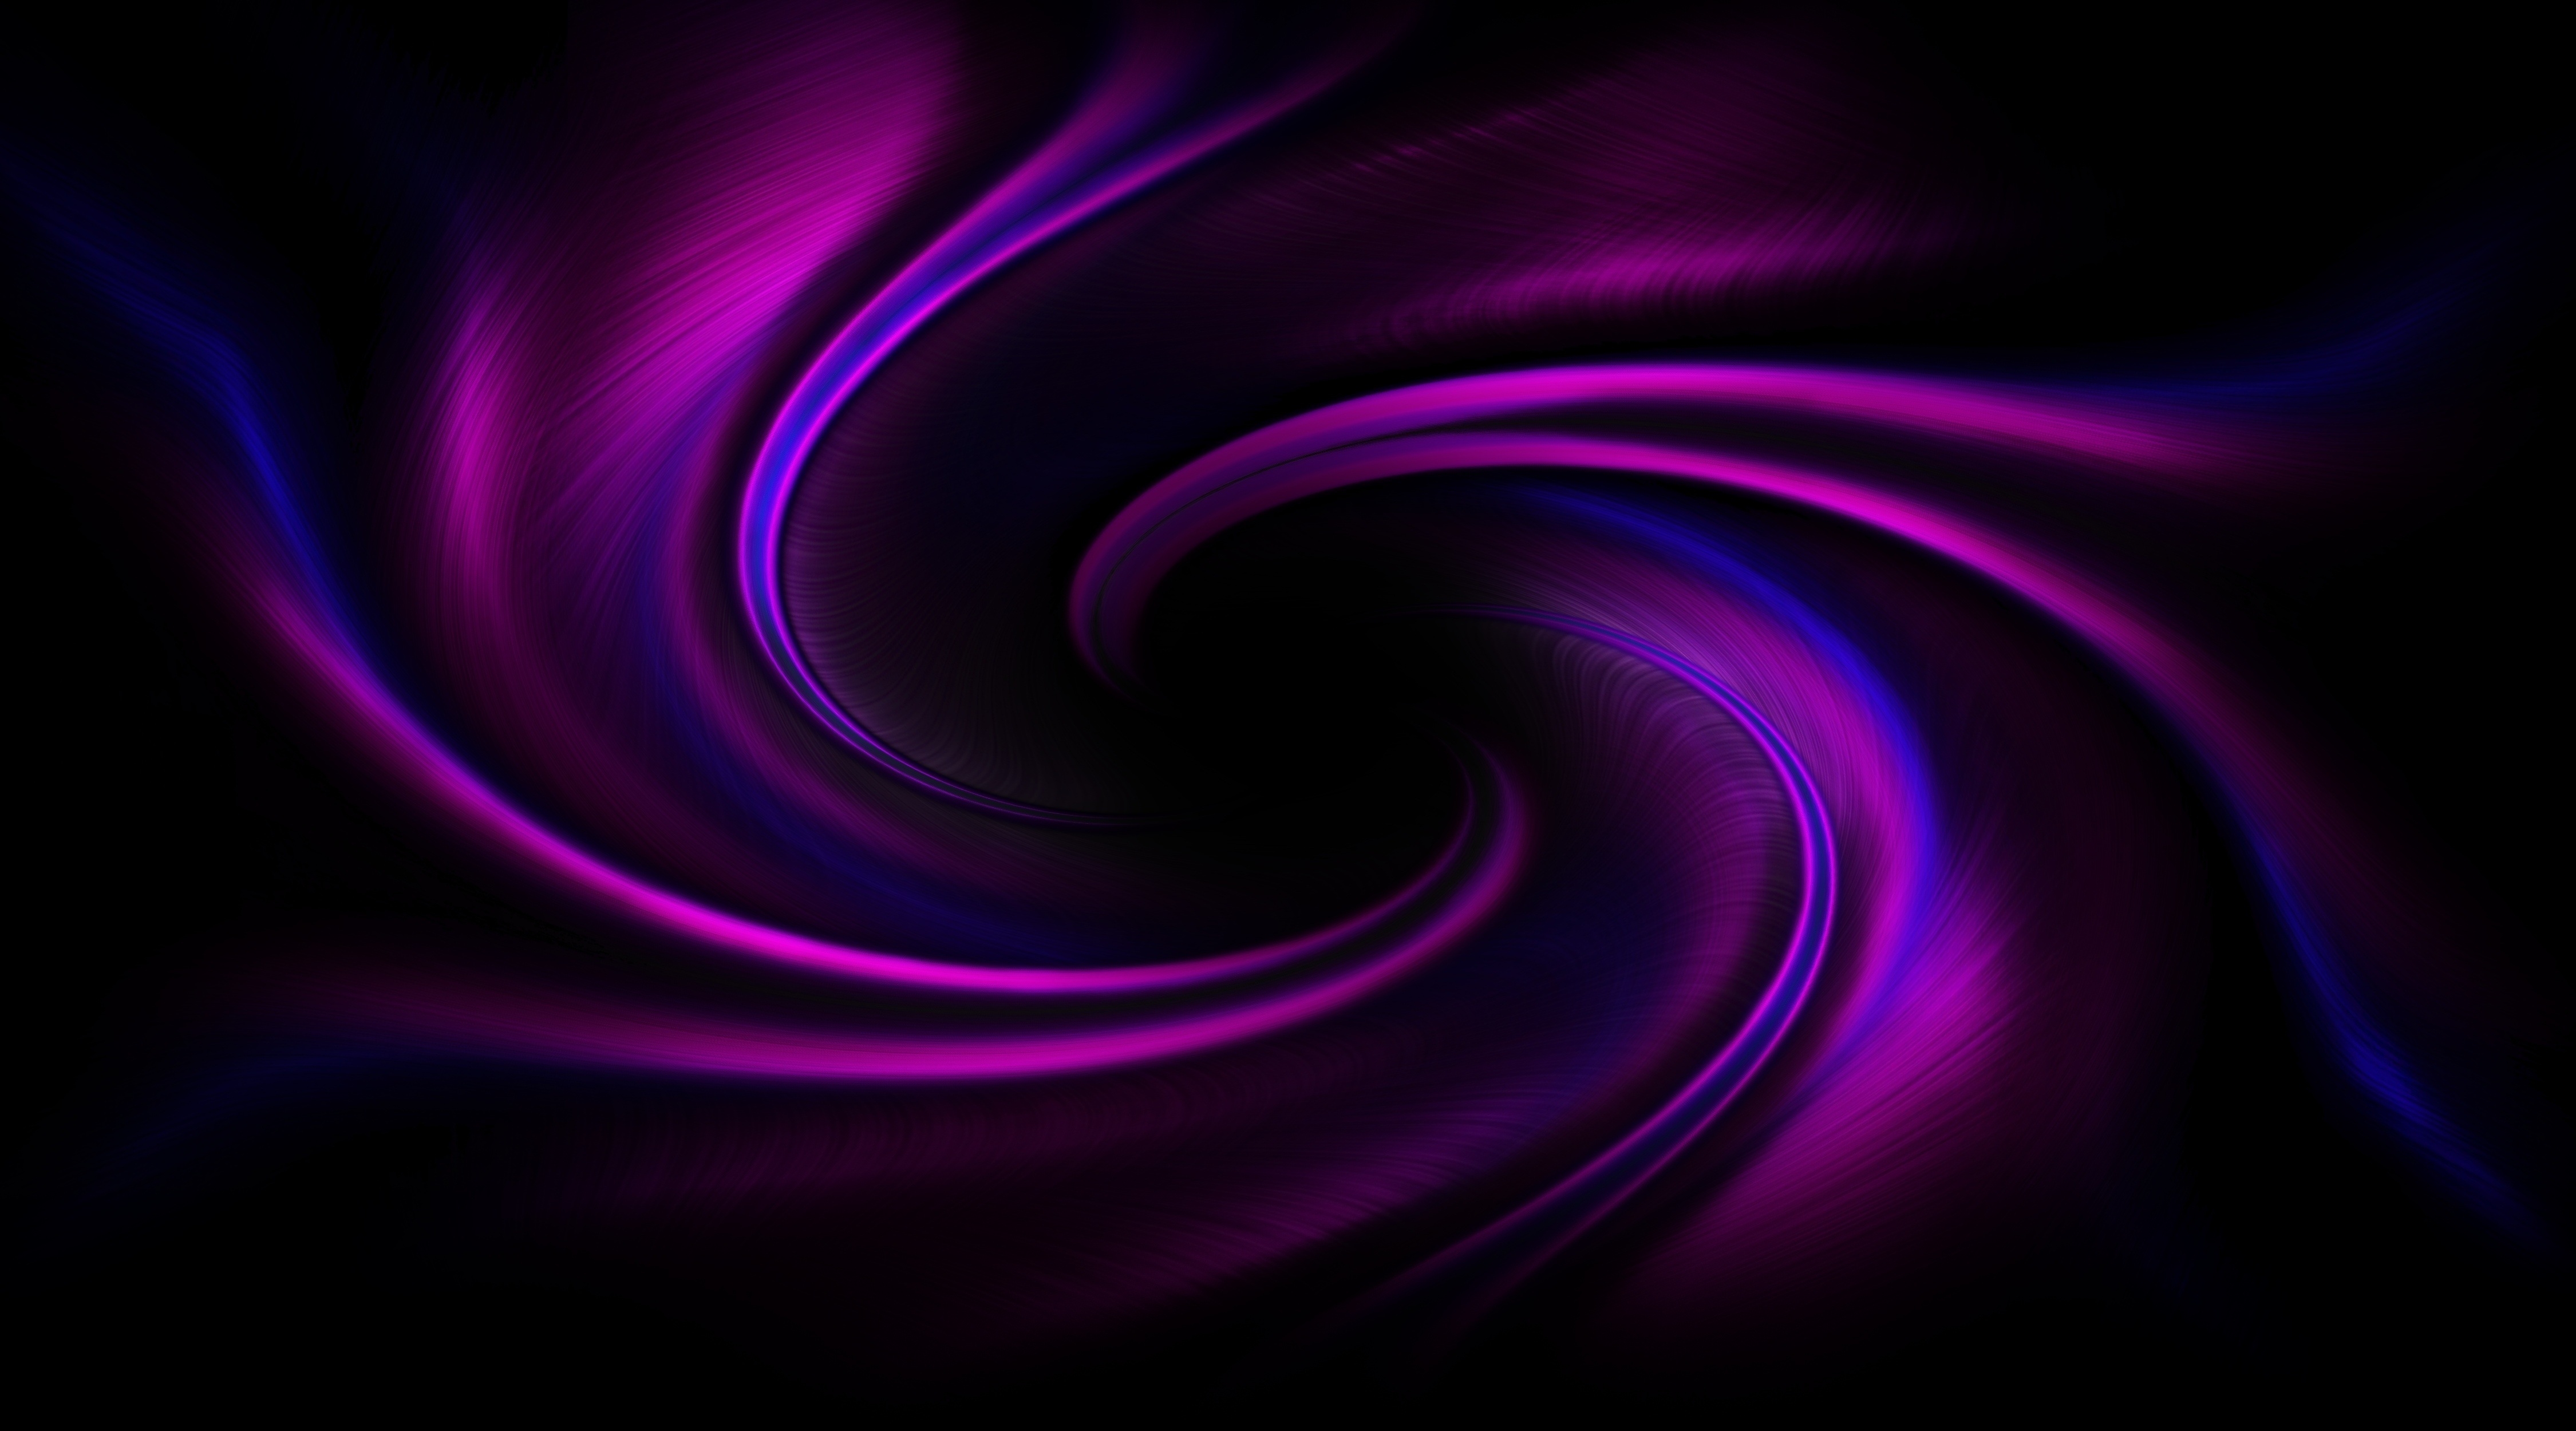 abstract, violet, relief, rotation, purple, merge, confluence, maelstrom, whirlpool